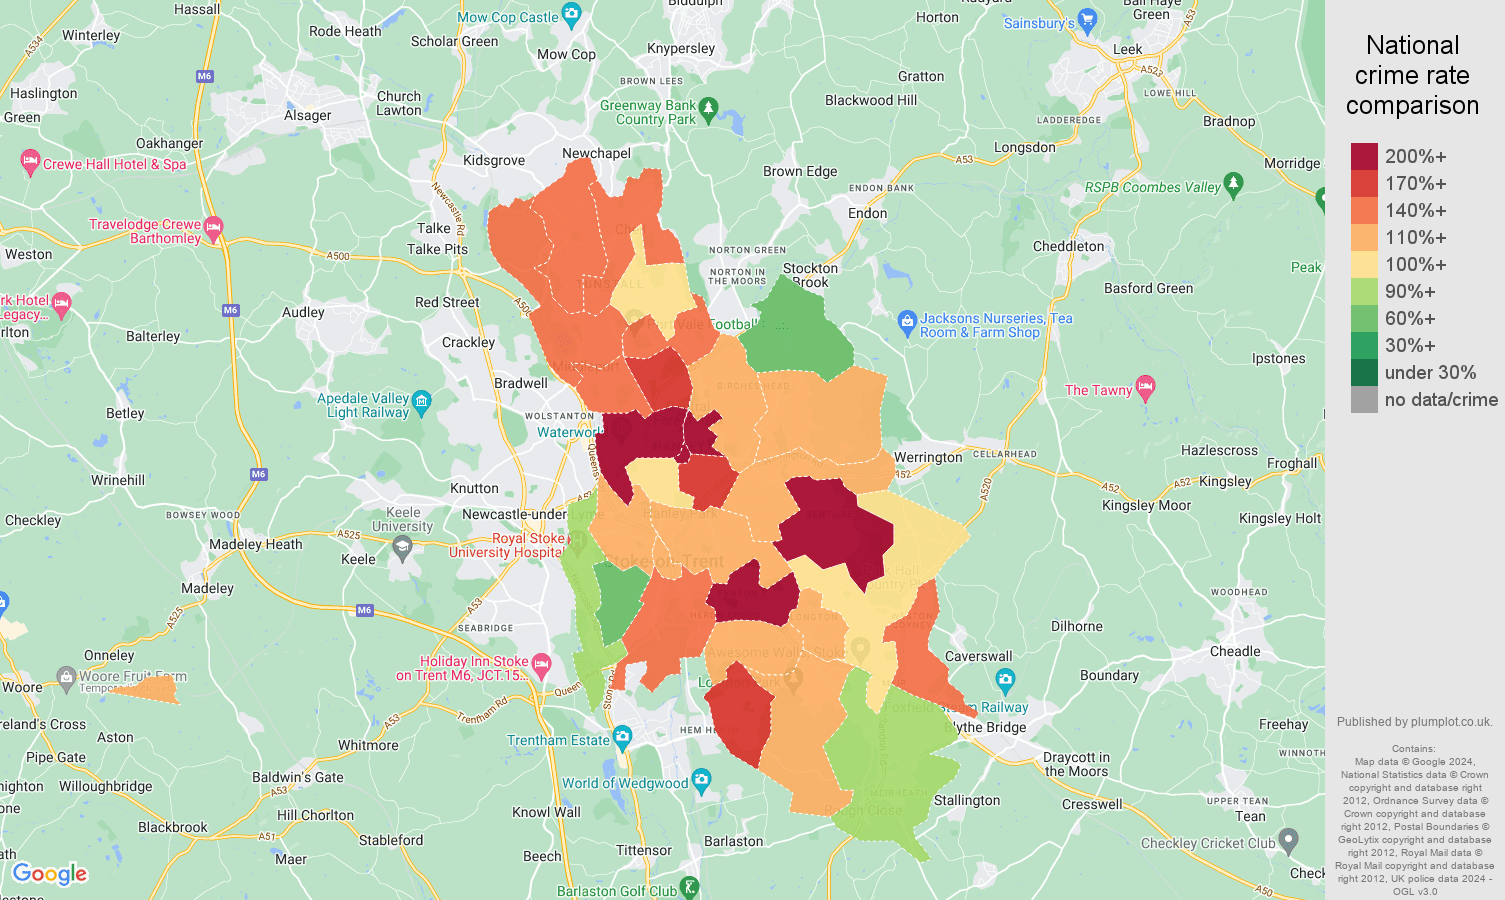 Stoke on Trent crime rate comparison map